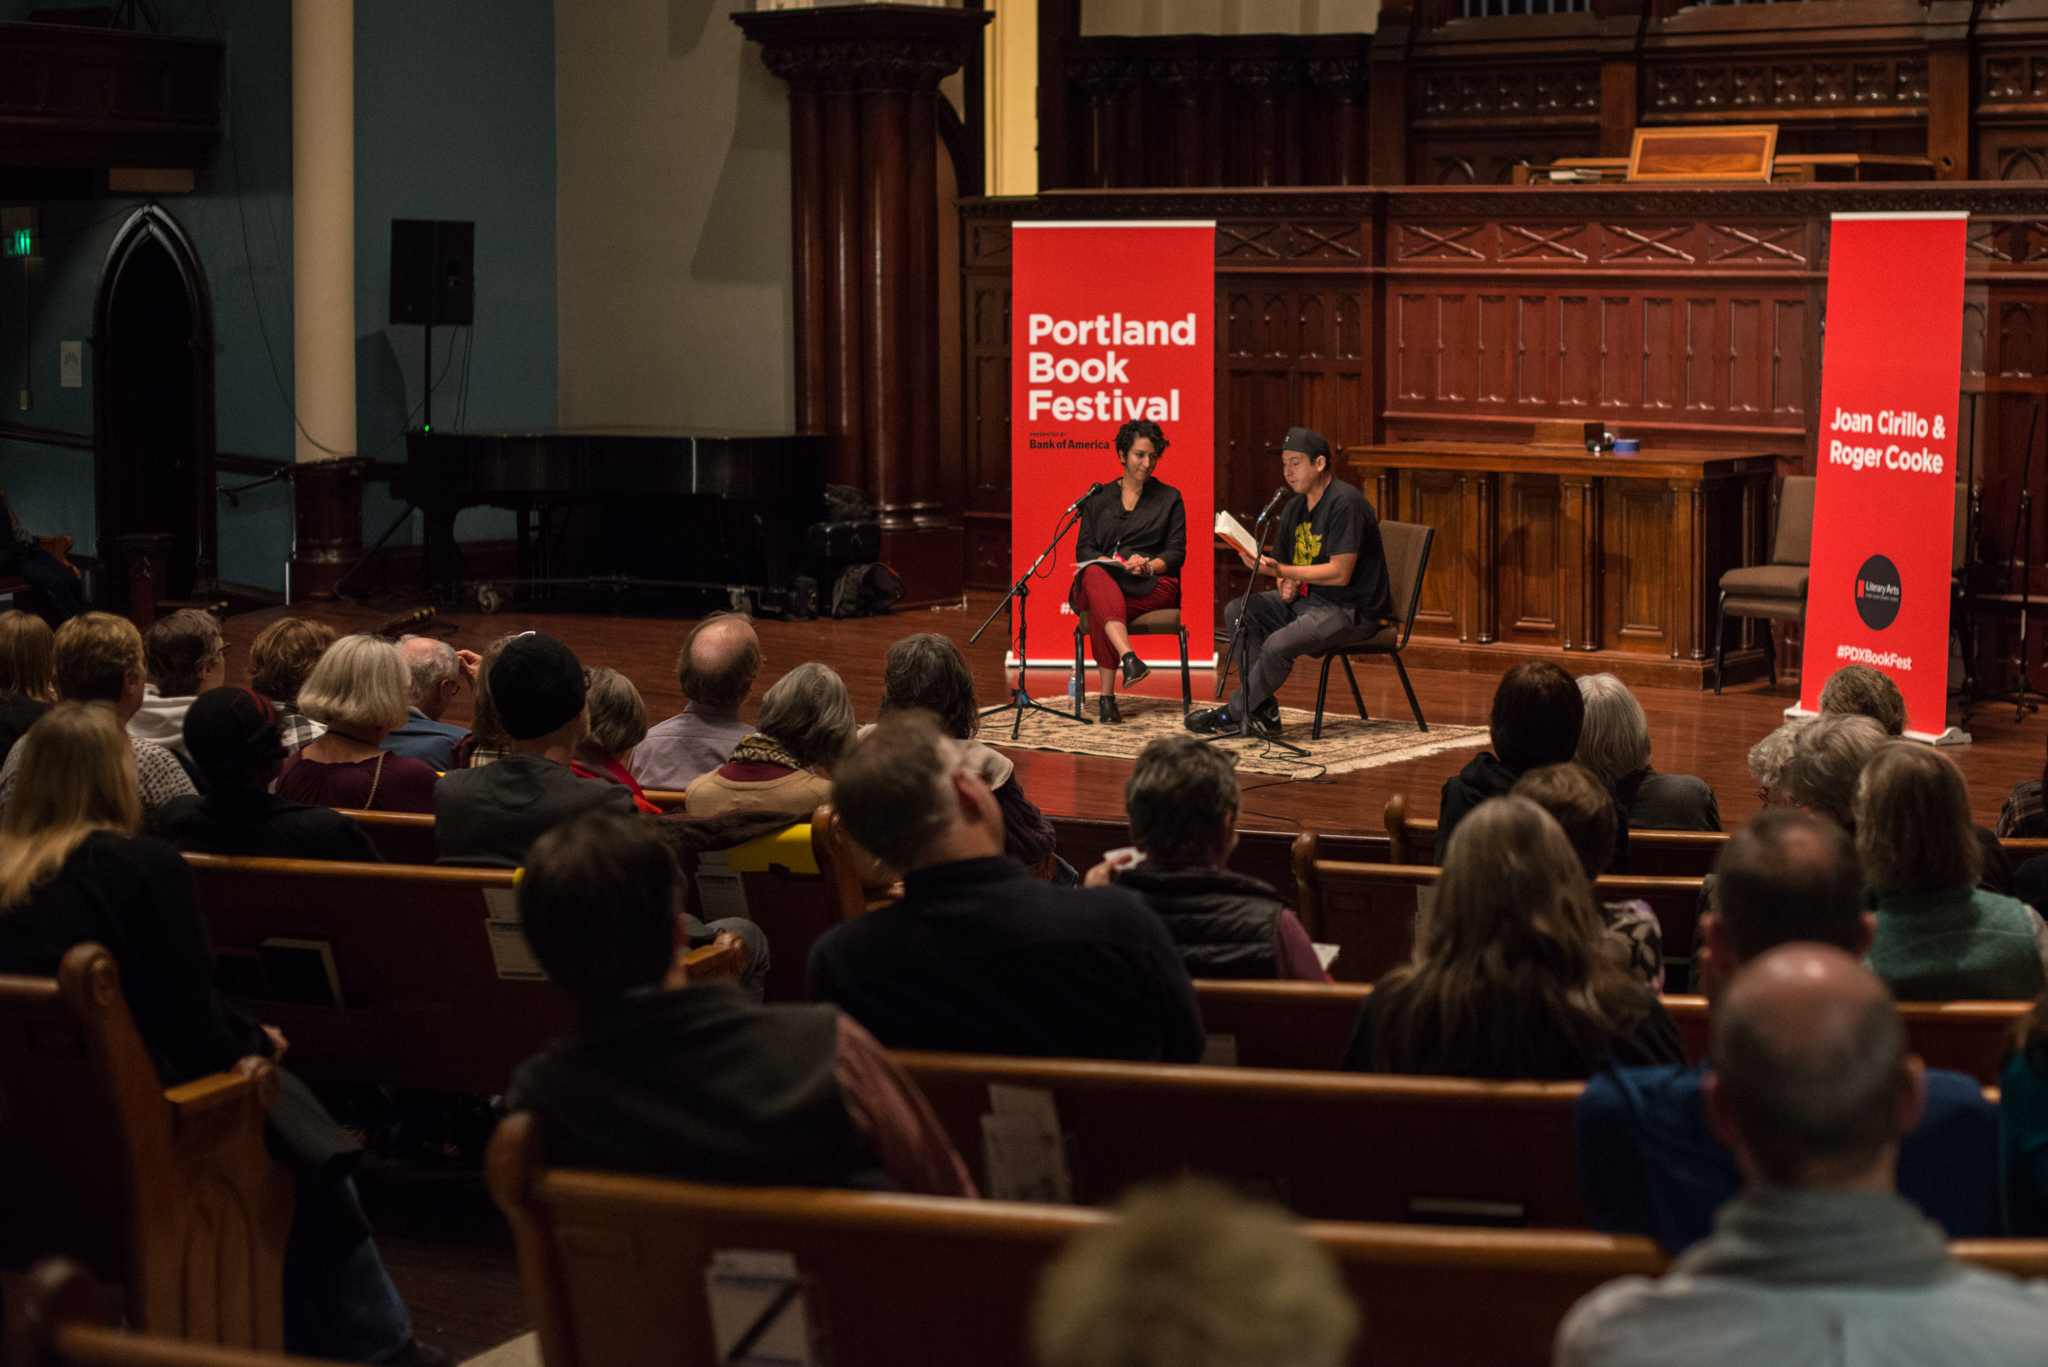 Two people from Literary Arts sit on stage in front of red banners that read "Portland Book Festival" in front of a large audience